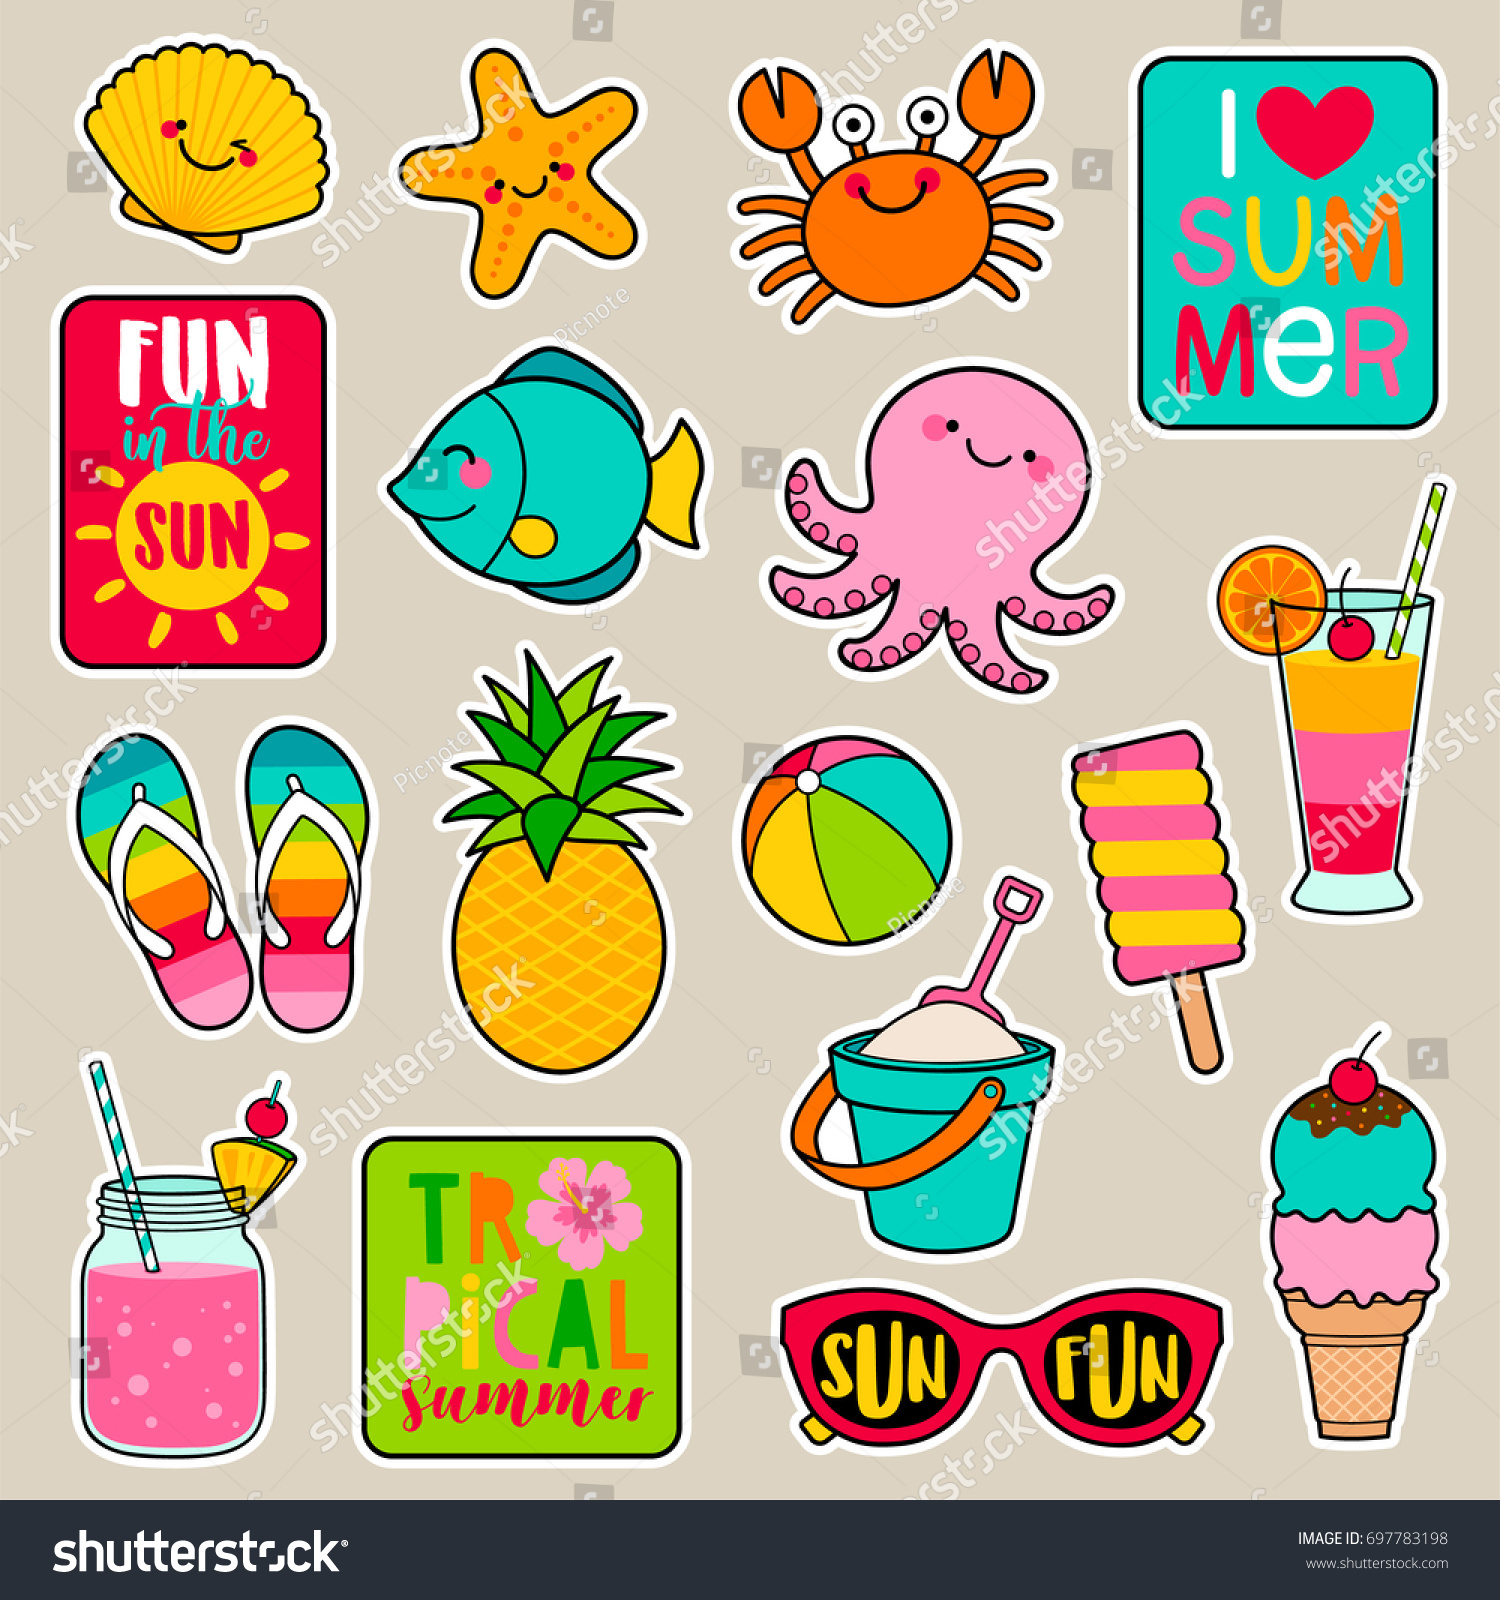 SVG of Set of cute cartoon badges, colorful fun stickers design, summer holidays concept elements.
 svg